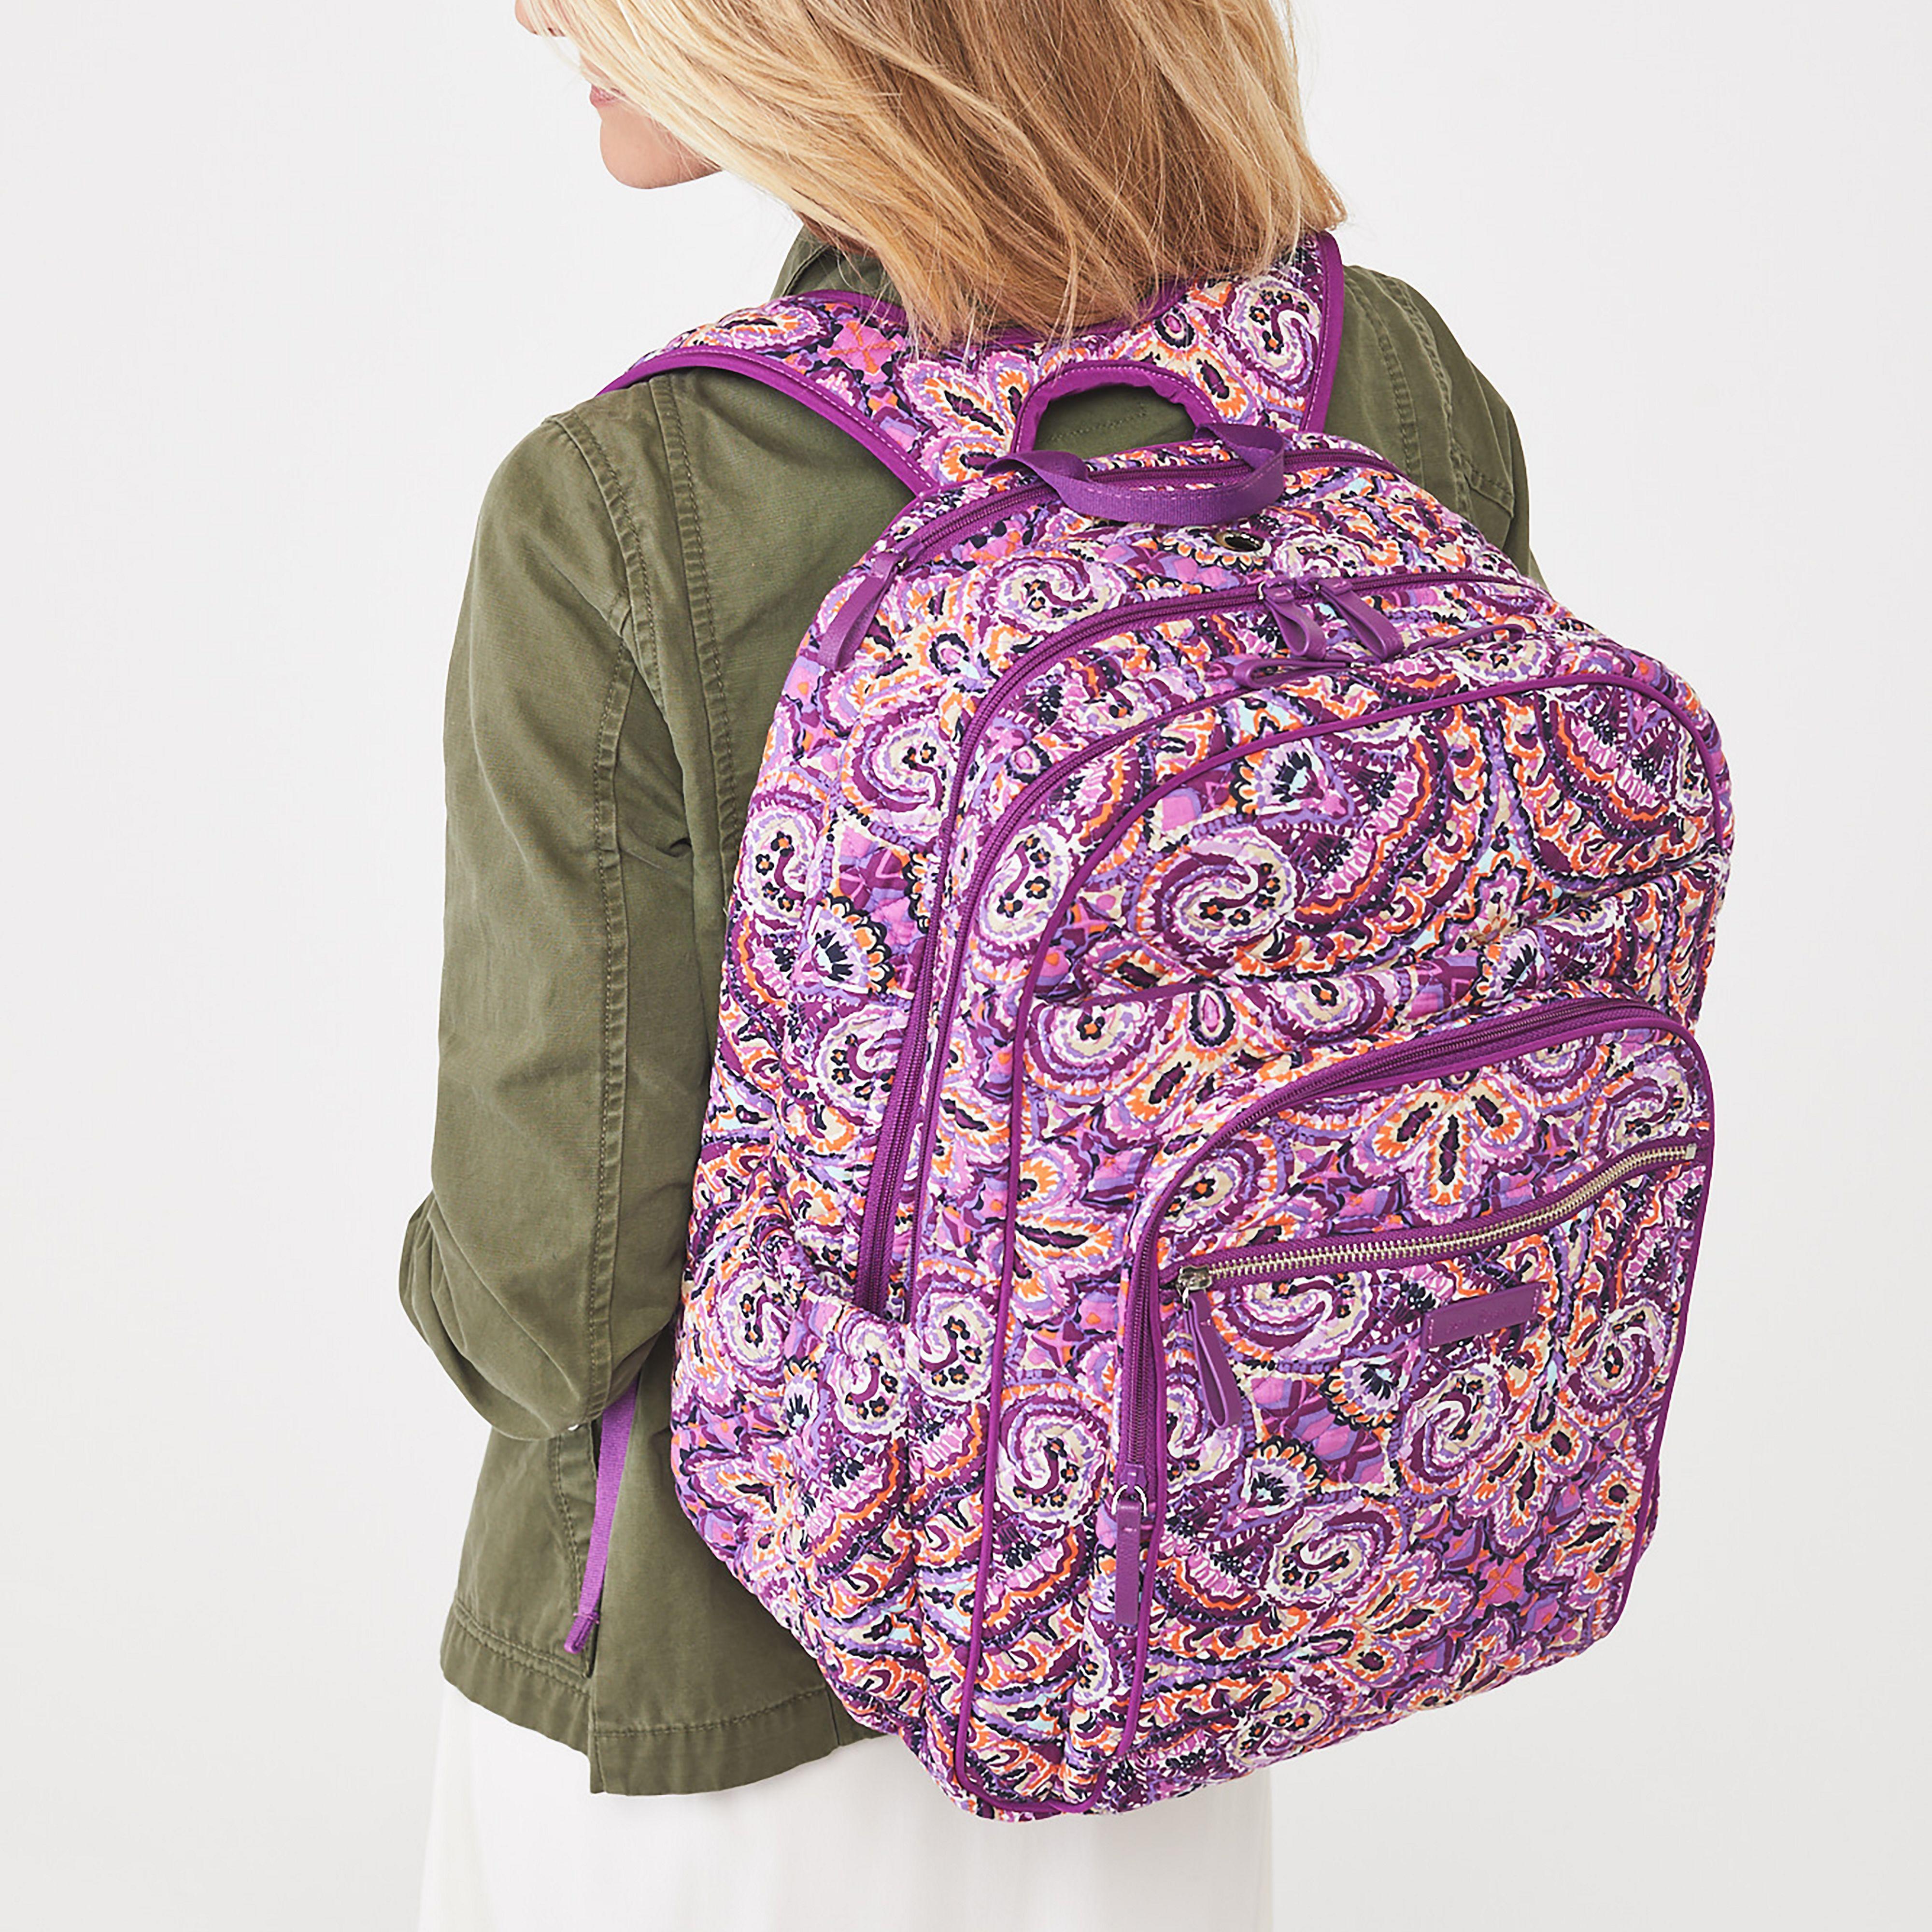 Lyst - Vera Bradley Iconic Xl Campus Backpack in Purple